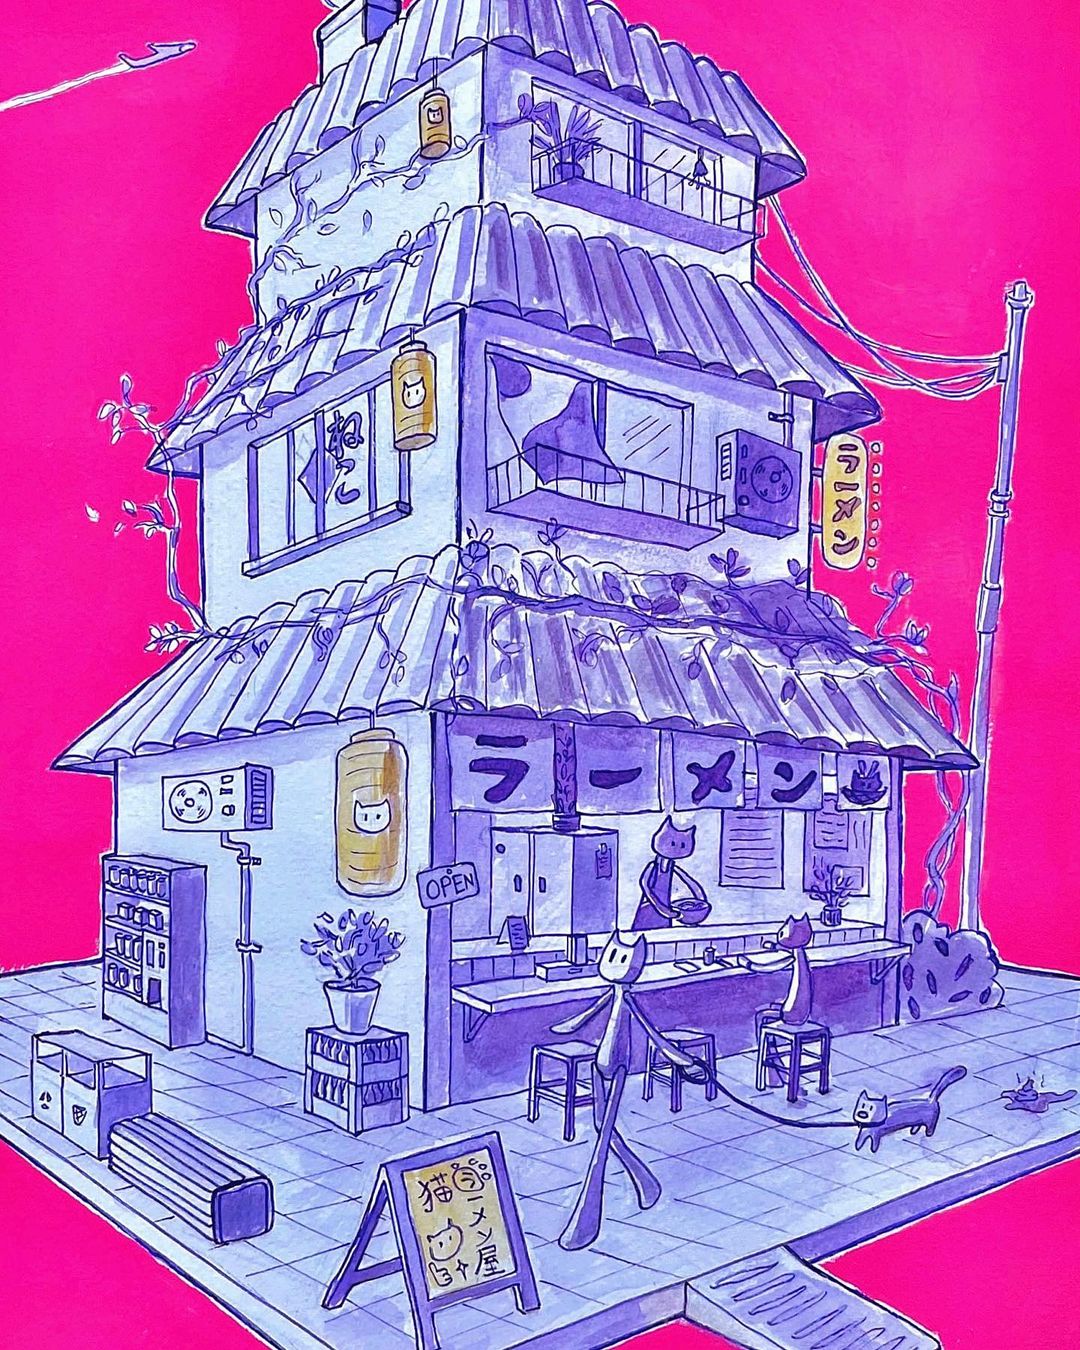 12. @artenshi_ artwork of a temple style building with a restaurant inside and catlike people around